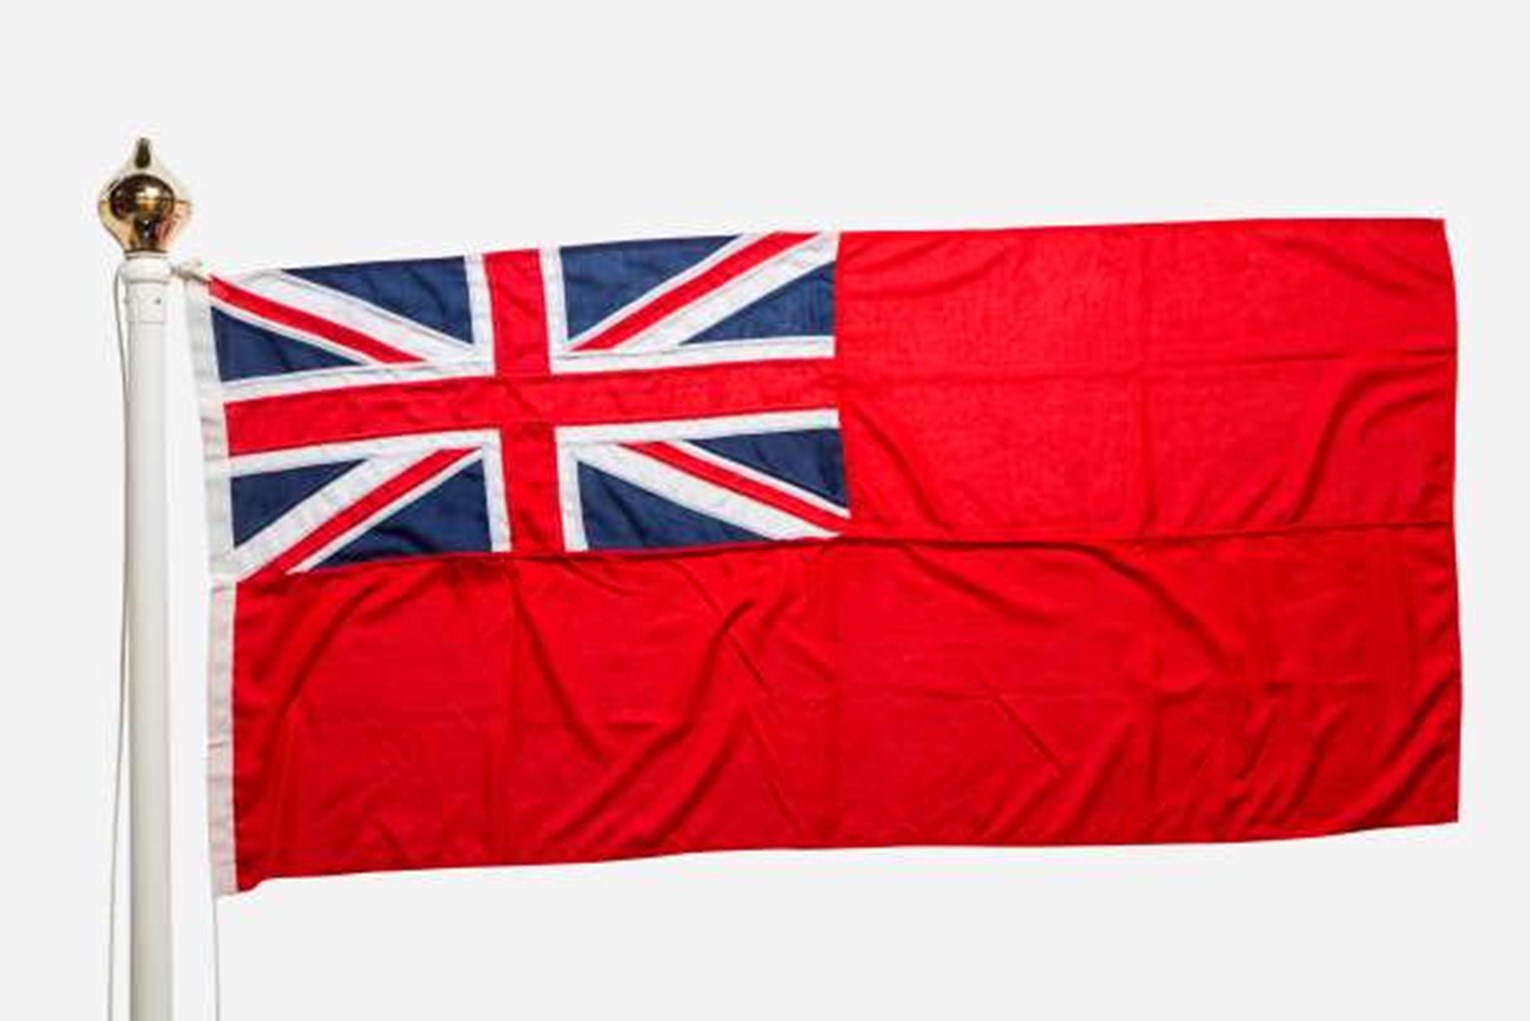 The Vexillology of Wales and the Union Flag - Historic UK